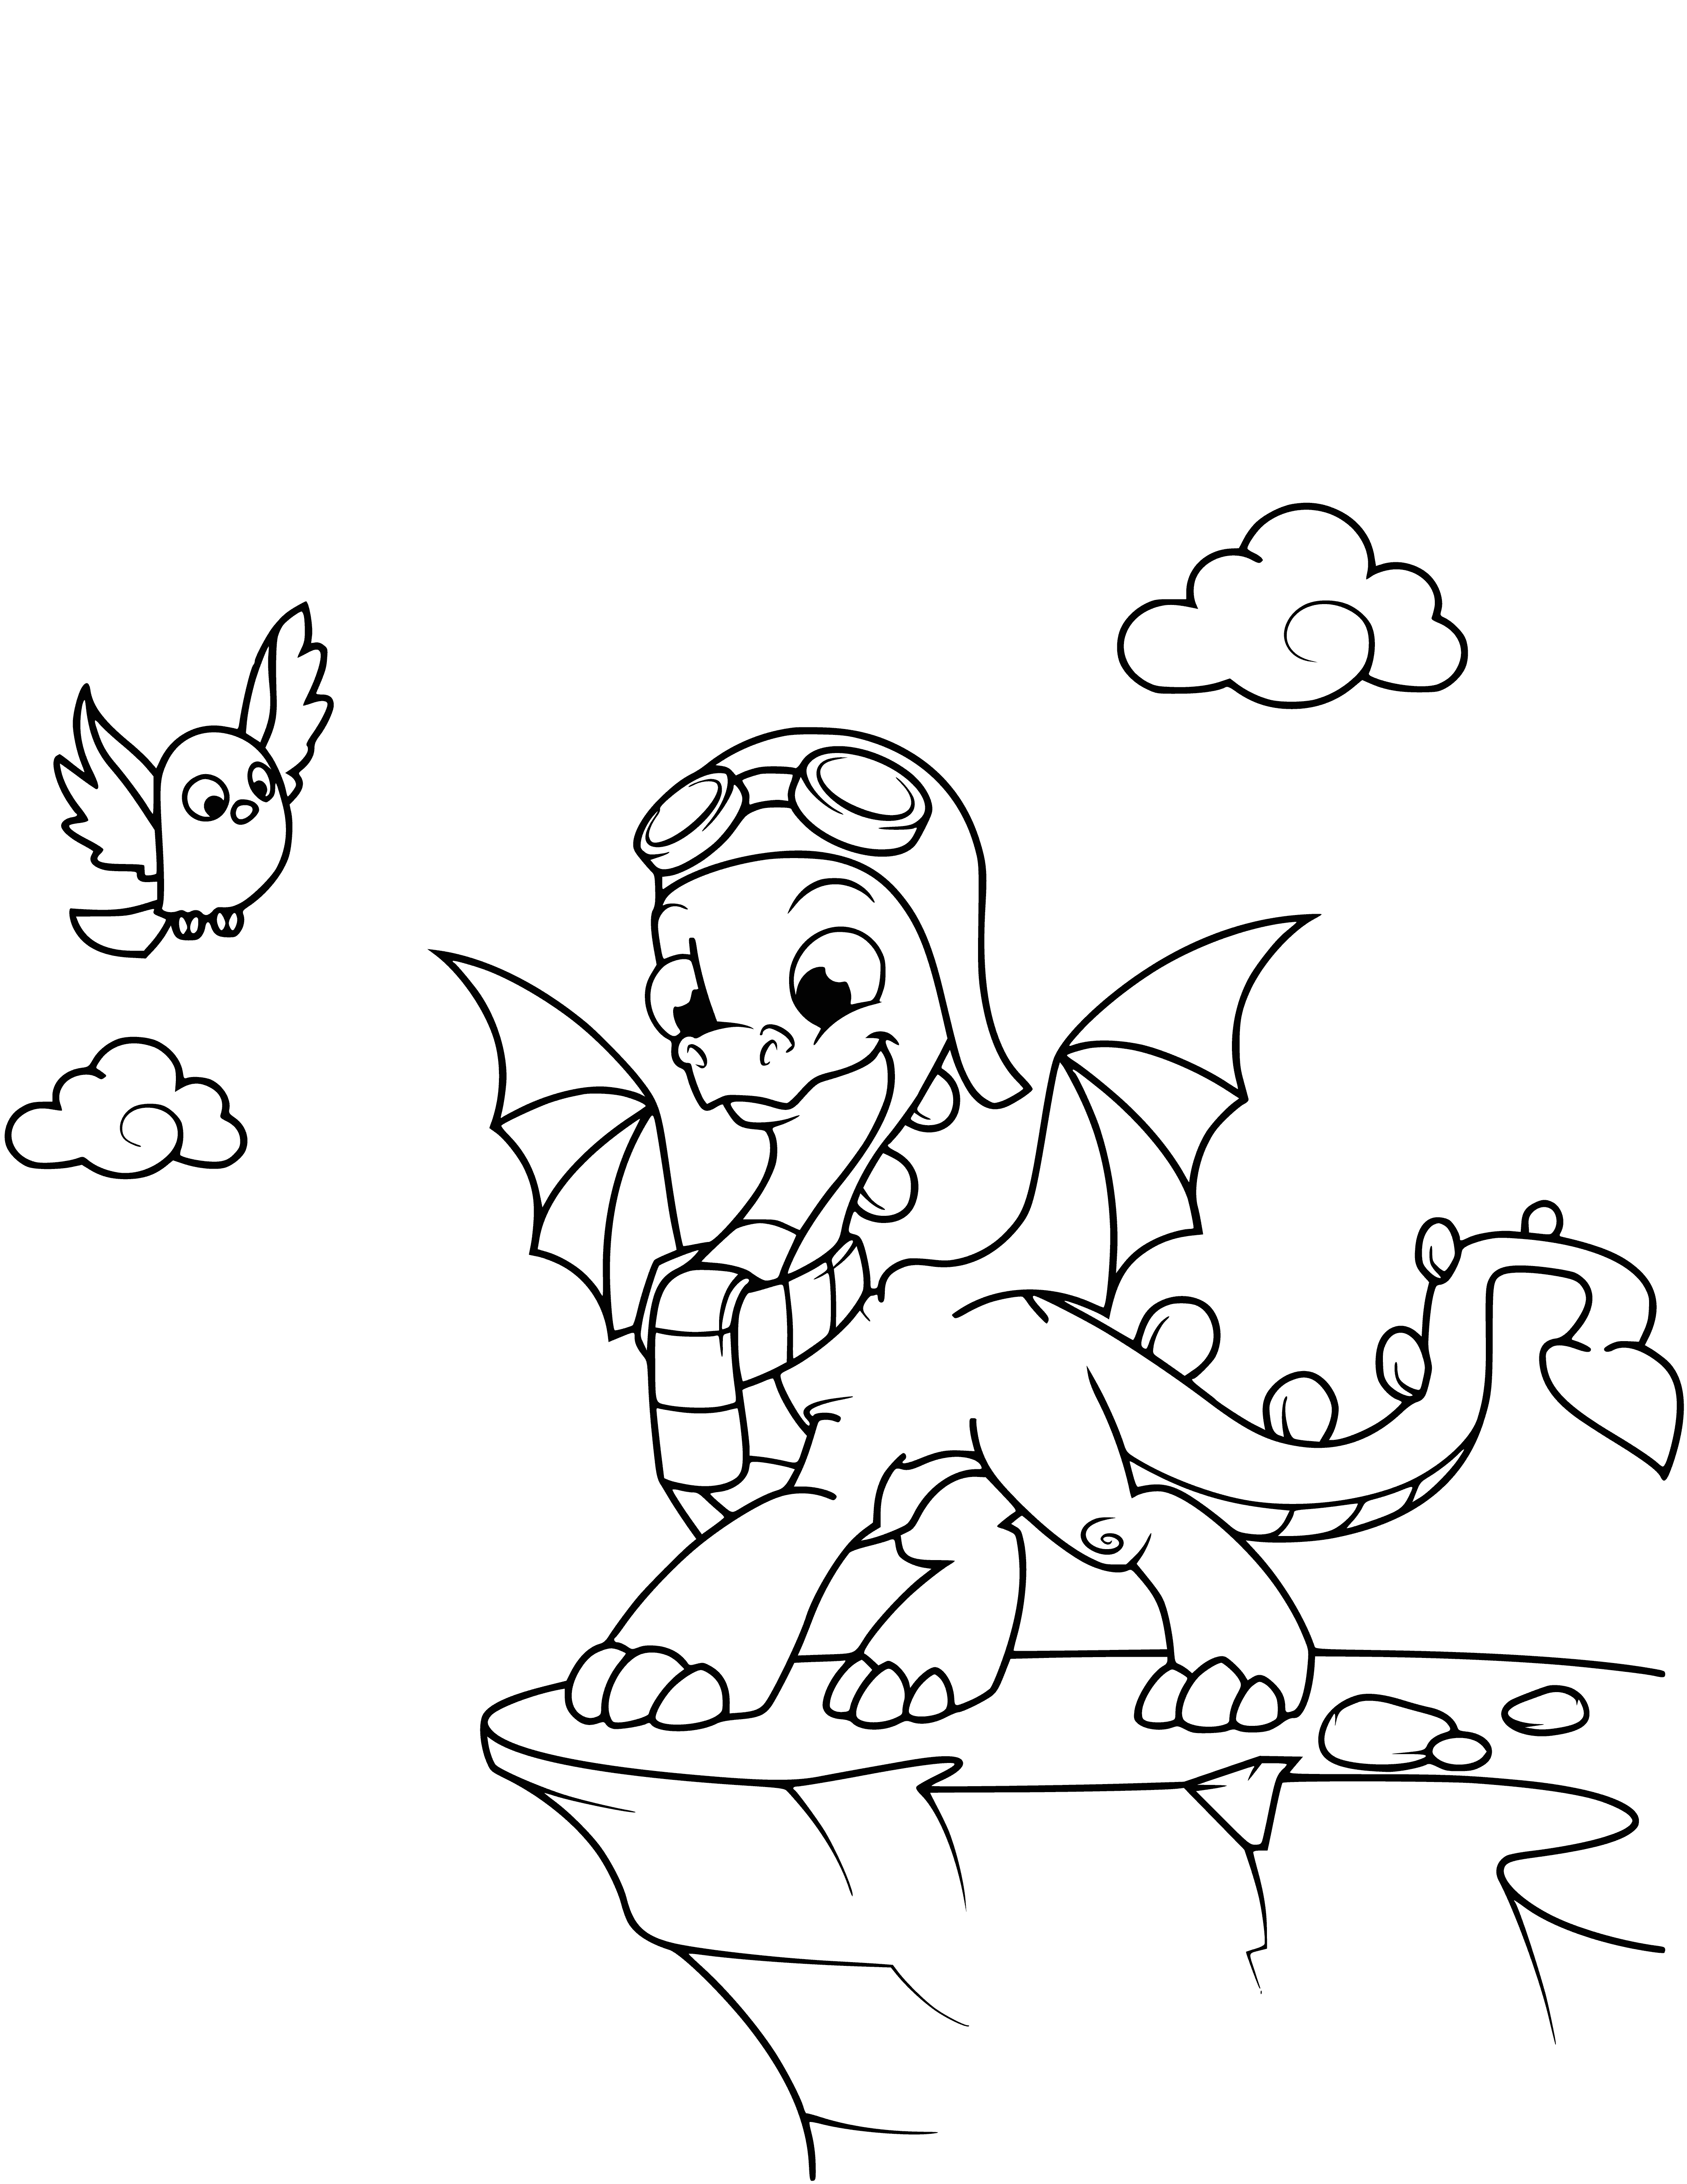 coloring page: Two dragons fly, one cheers the other on. Red and blue soar through the air.